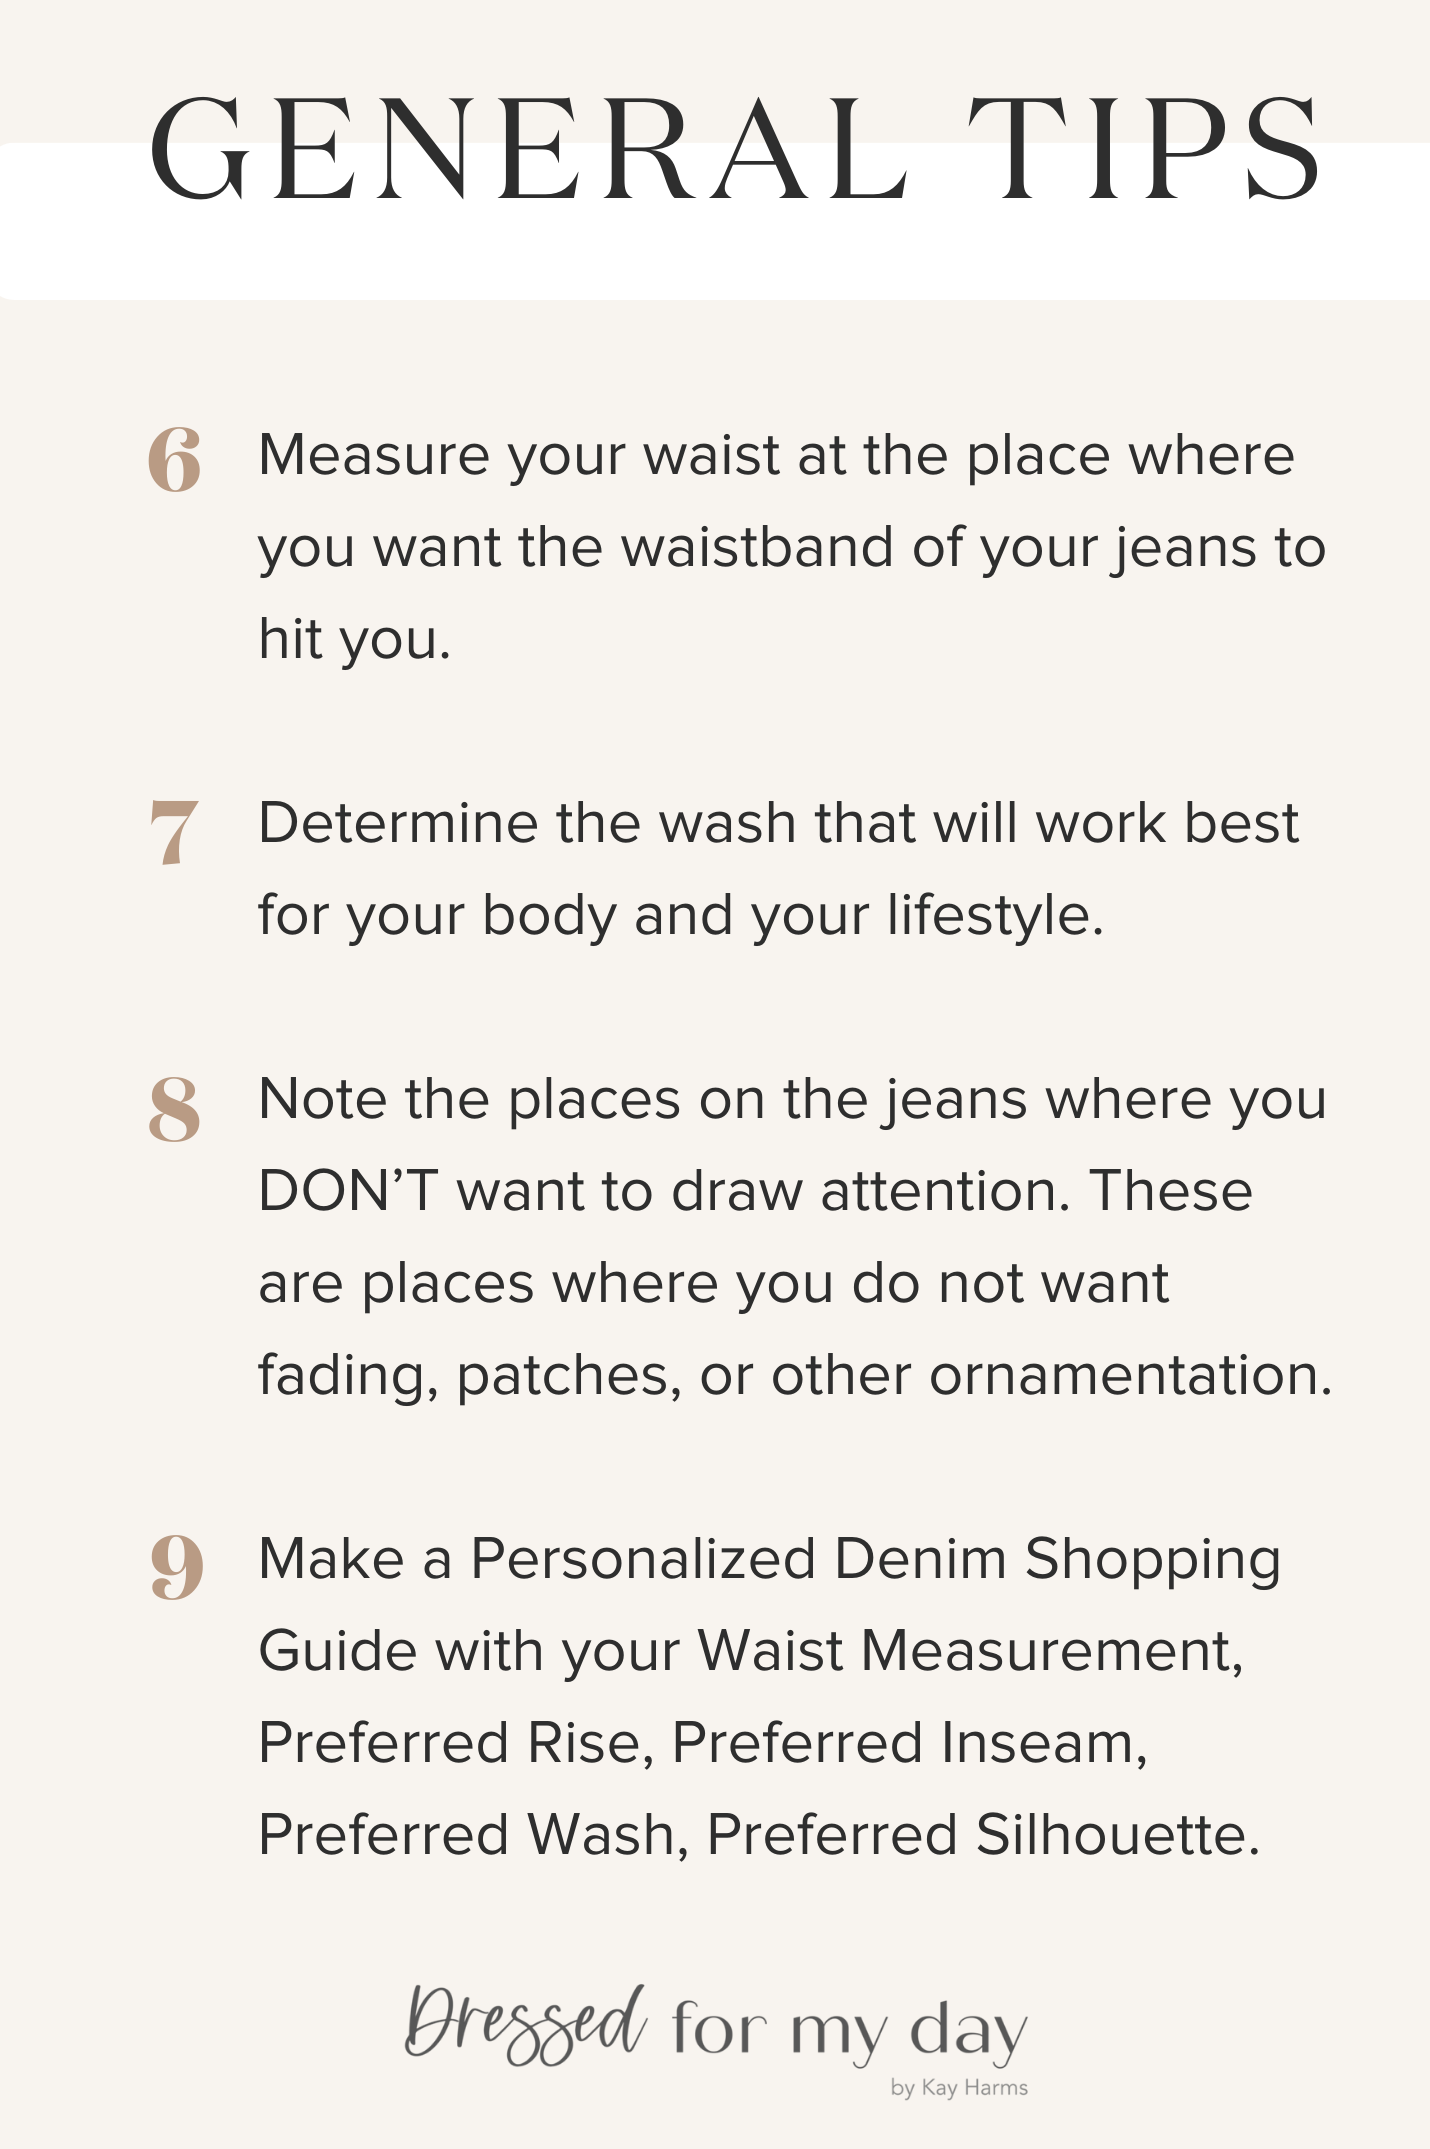 General Tips for Finding the Right Jeans